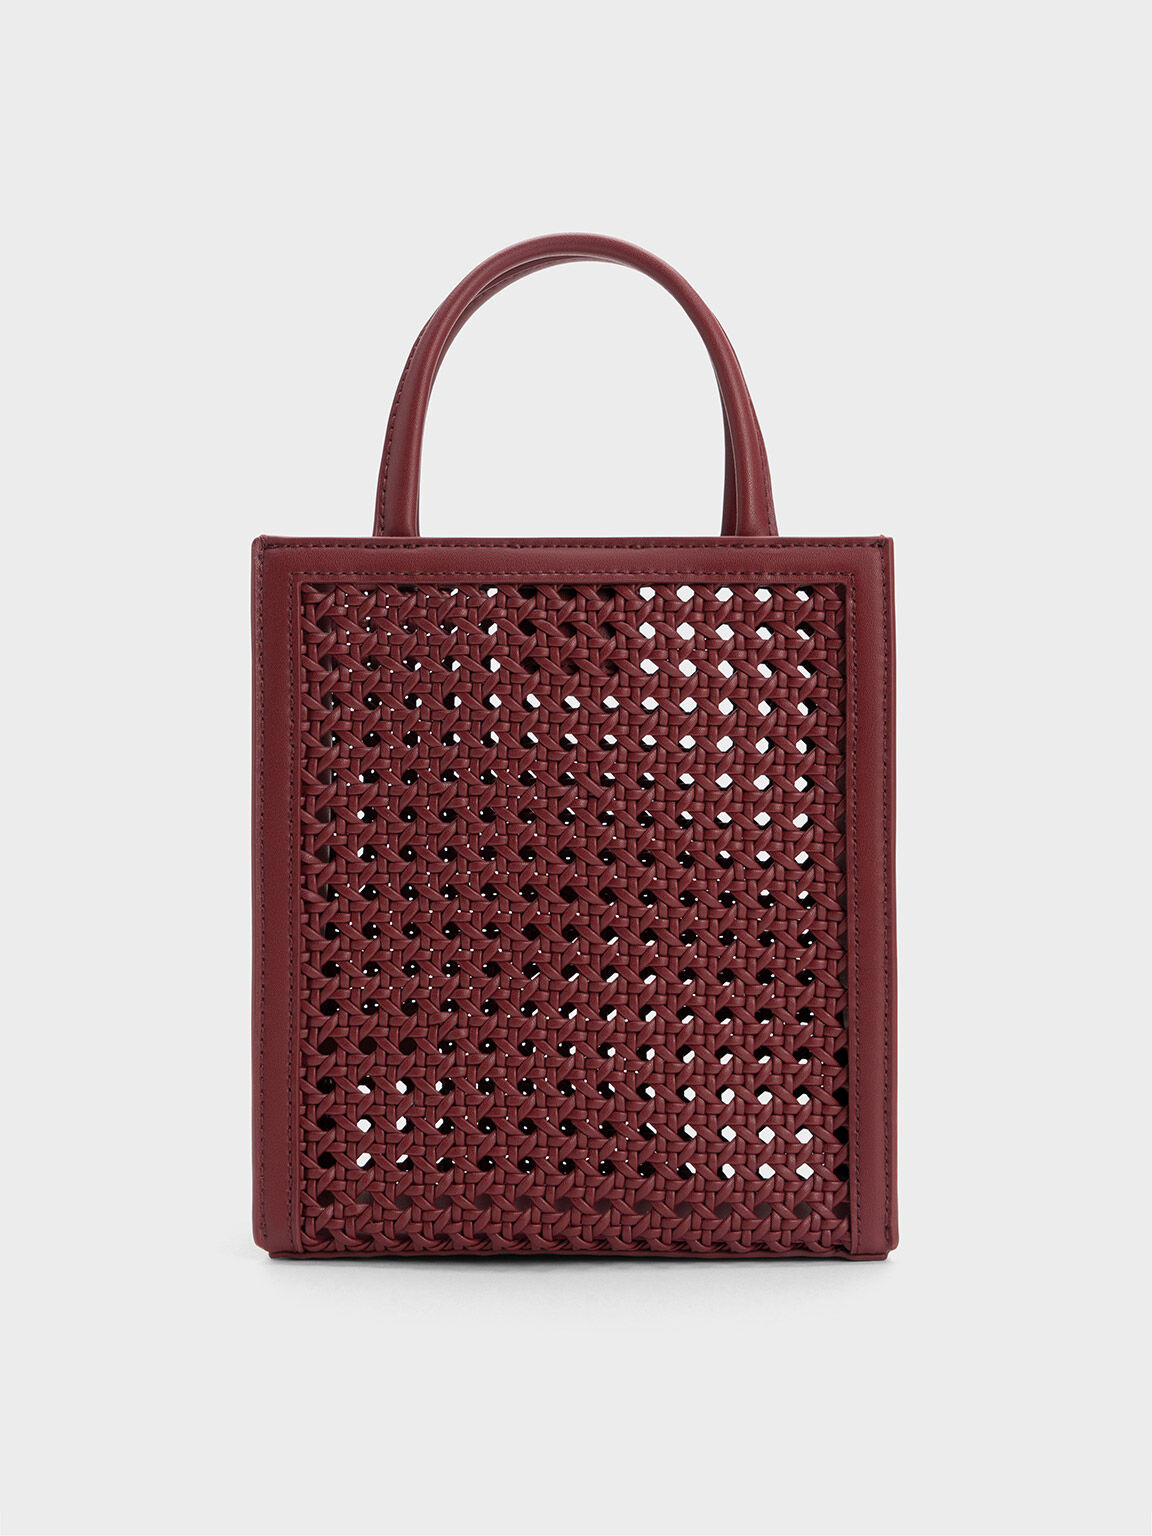 Woven Double Handle Tote Bag, Burgundy, hi-res